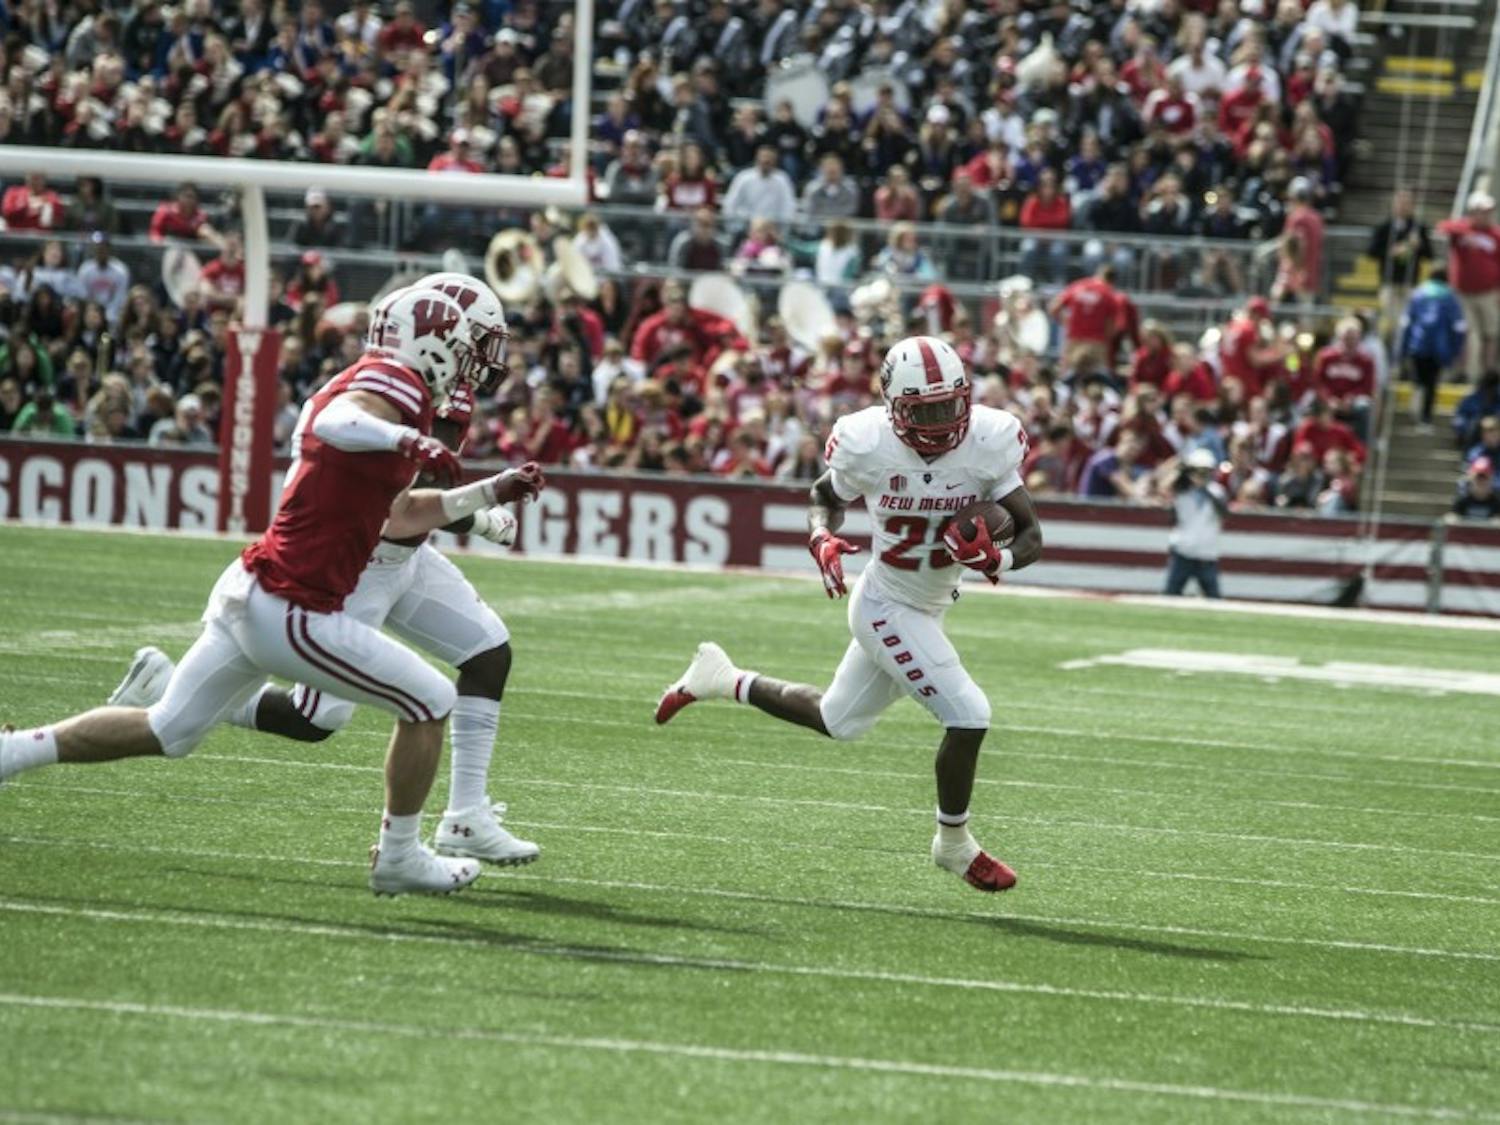 Tyrone Owens runs the ball with a pair of Wisconsin defenders in pursuit, Saturday at Camp Randall Stadium.